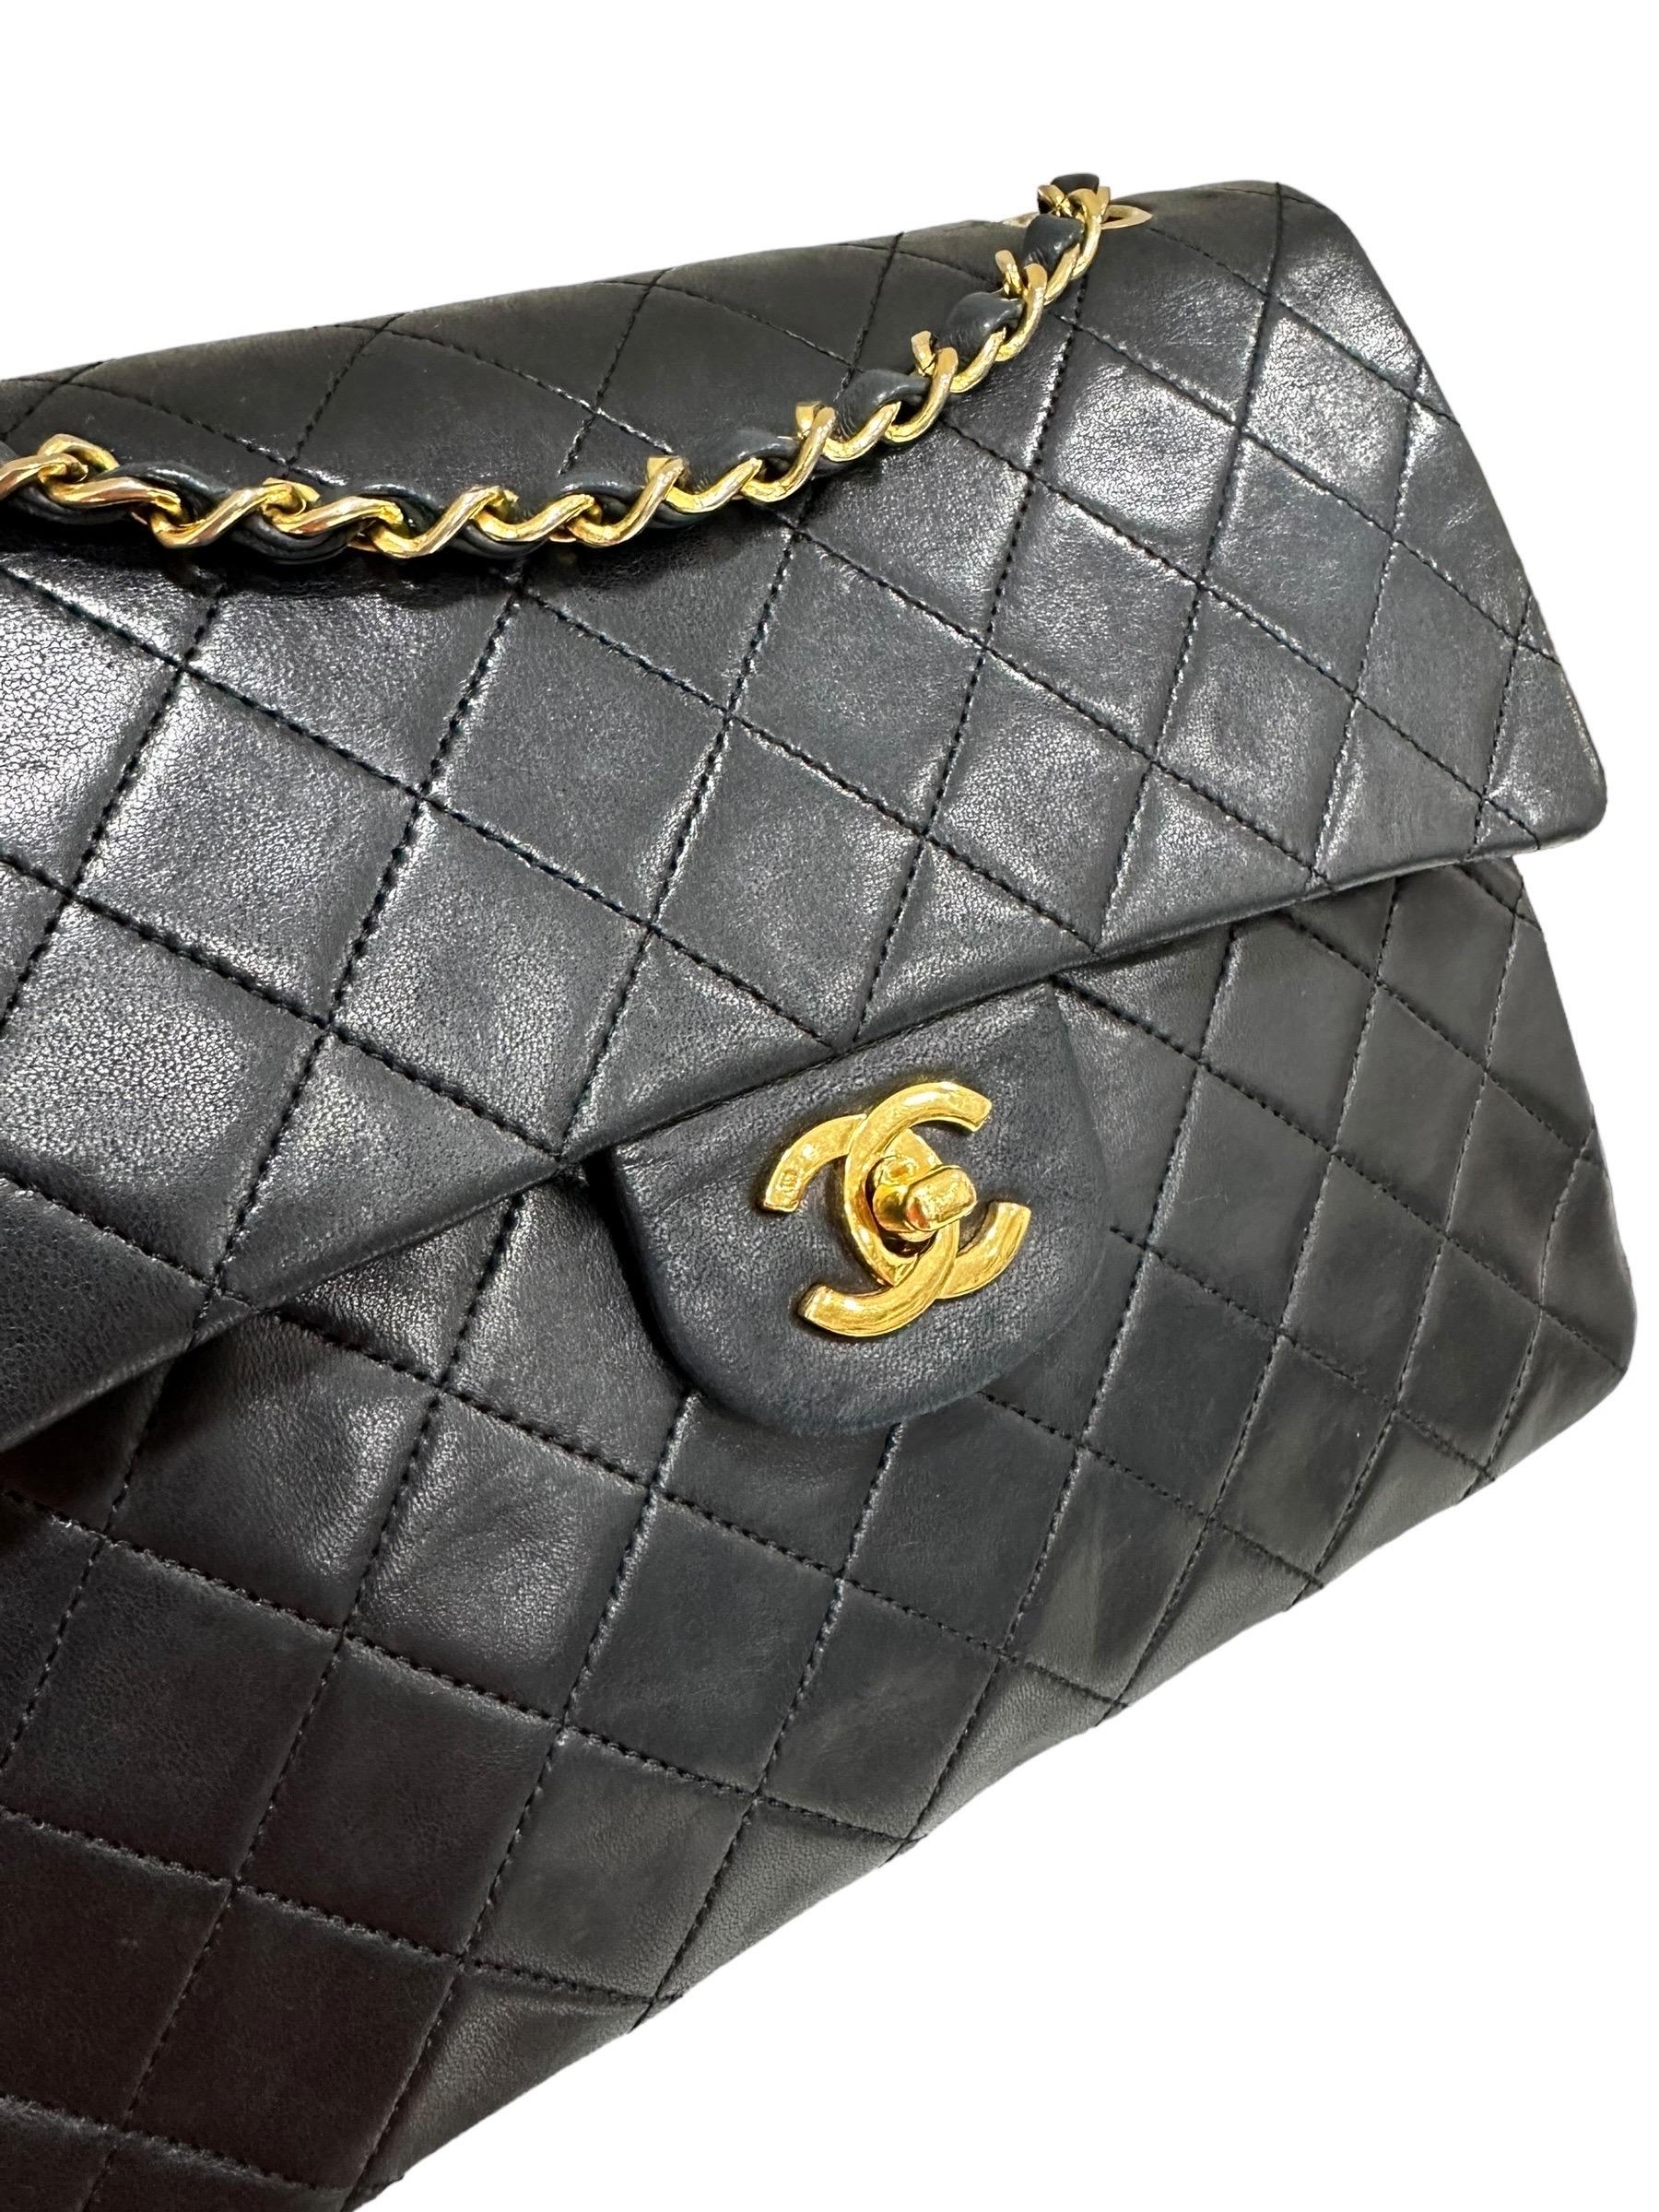  90' Chanel Timeless 2.55 Vertical Borsa a Tracolla Nera  Pour femmes 